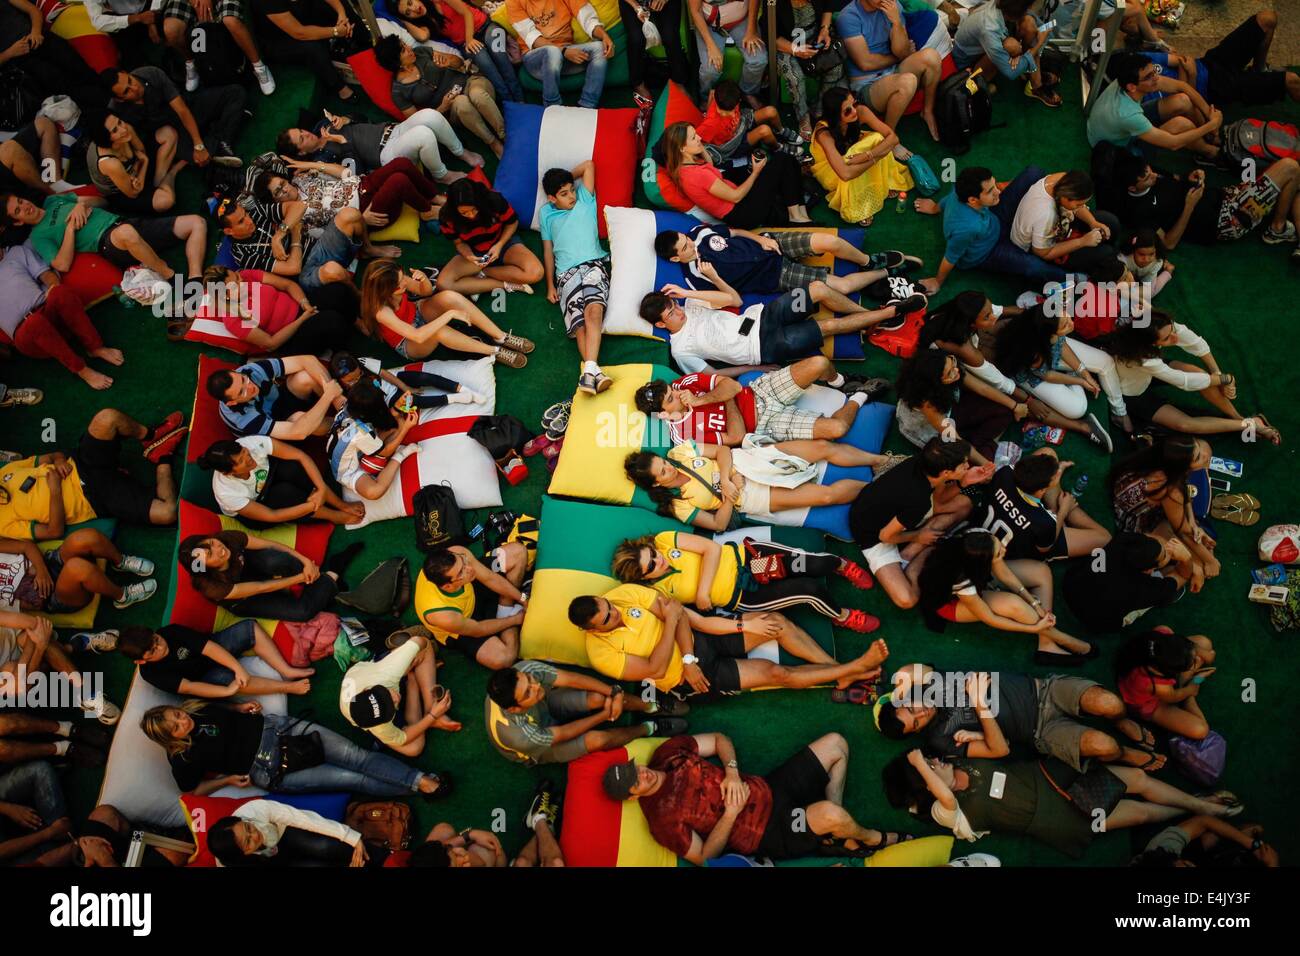 Brasilia, Brazil. 13th July, 2014. Fans watch the final match between Germany and Argentina of 2014 FIFA World Cup in Brasilia, Brazil, on July 13, 2014. Germany won 1-0 over Argentina after 120 minutes and took its fourth World Cup title on Sunday. Credit:  Jhon Paz/Xinhua/Alamy Live News Stock Photo